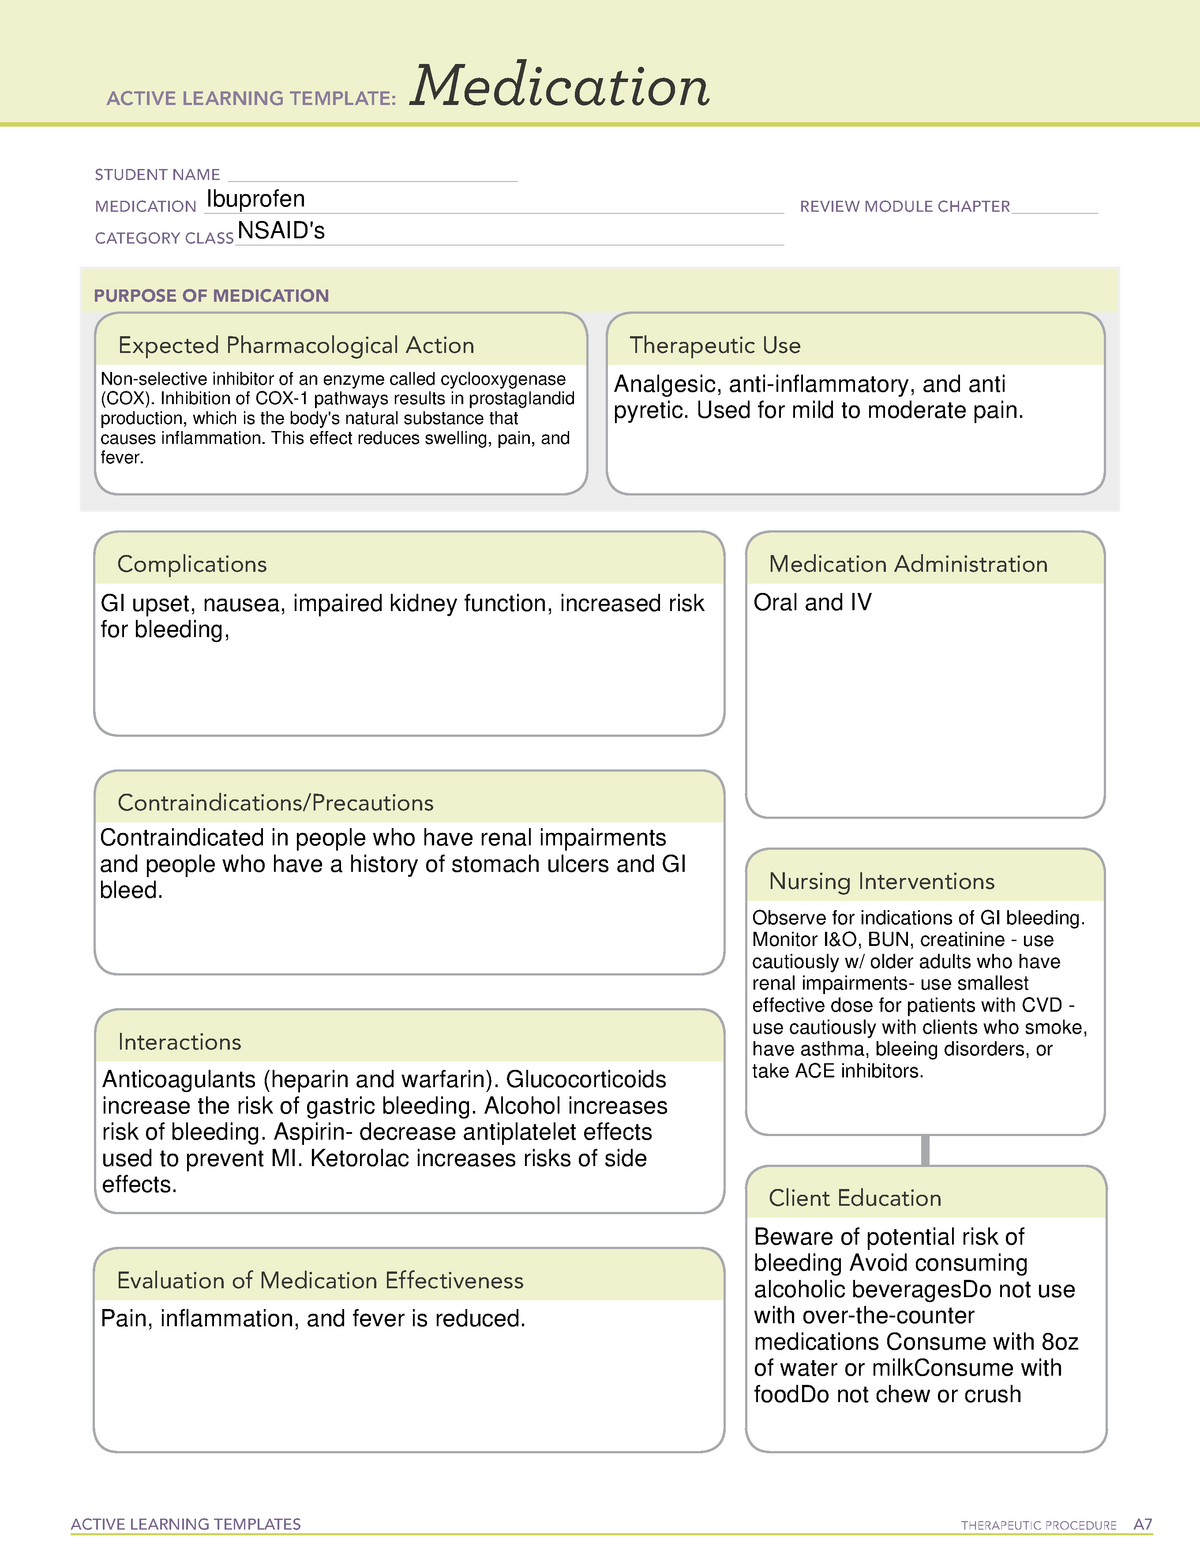 med-alt-ibuprofen-active-learning-templates-therapeutic-procedure-a